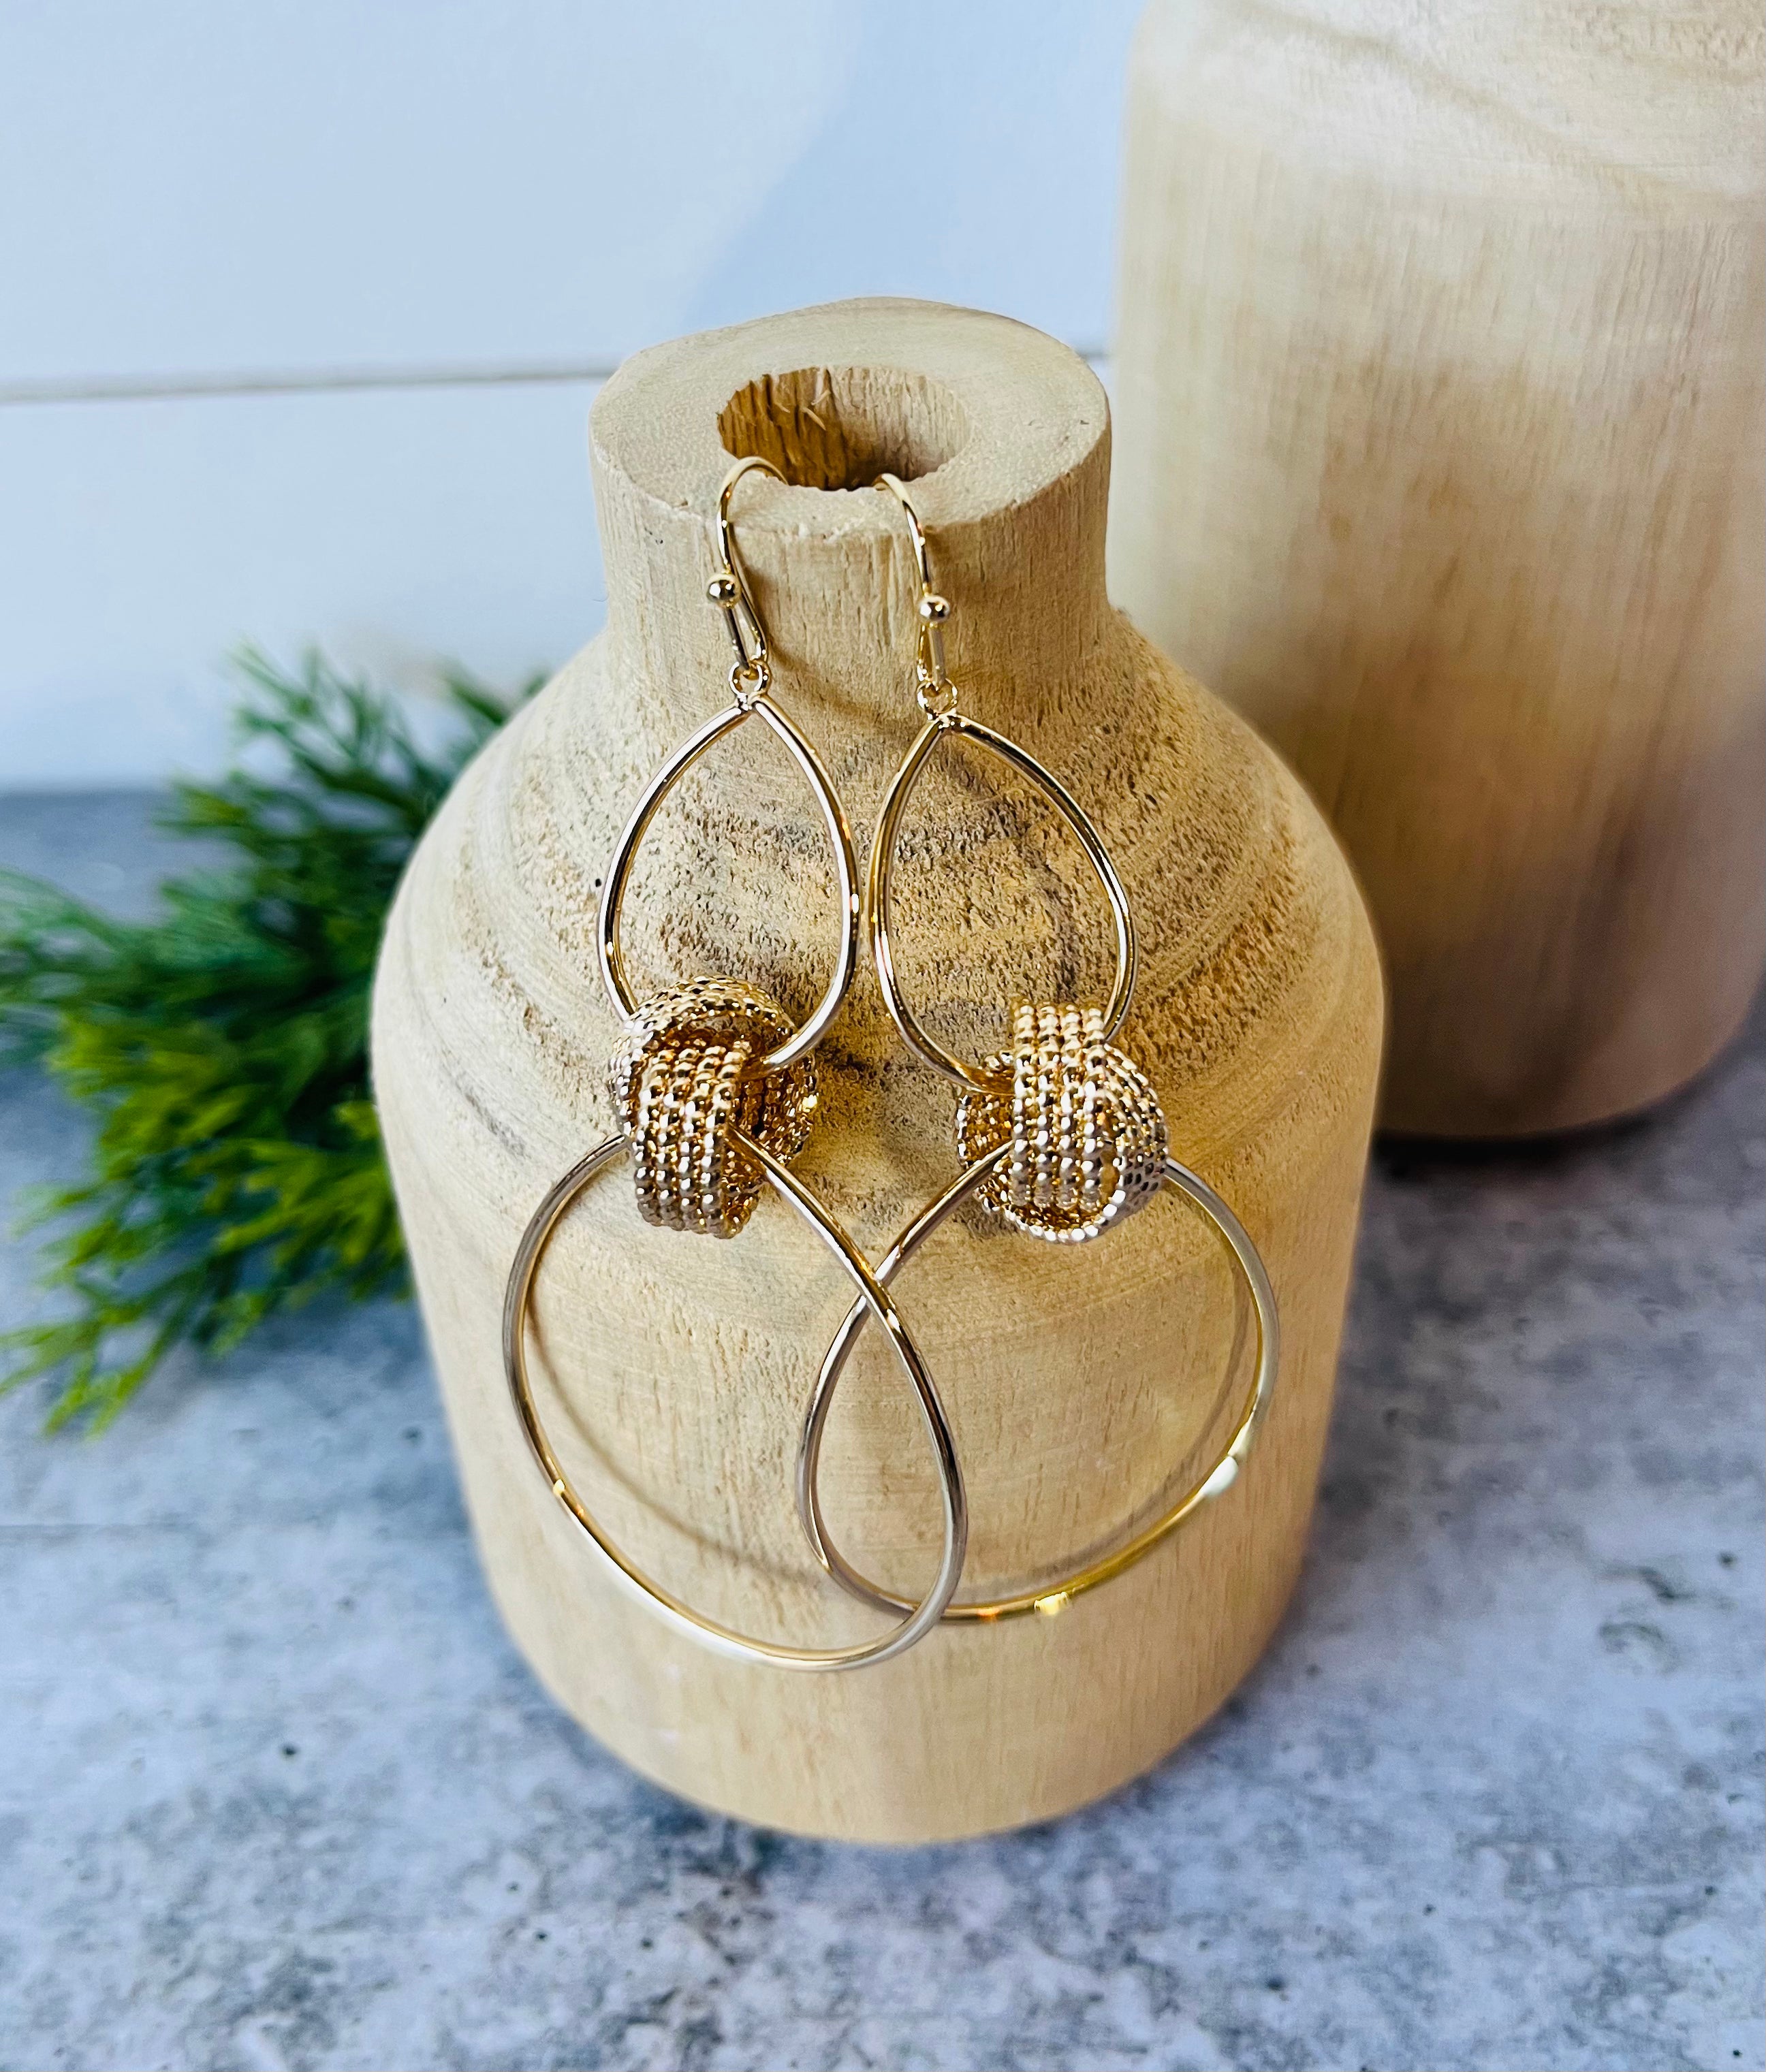 Knotted Dangle Earrings